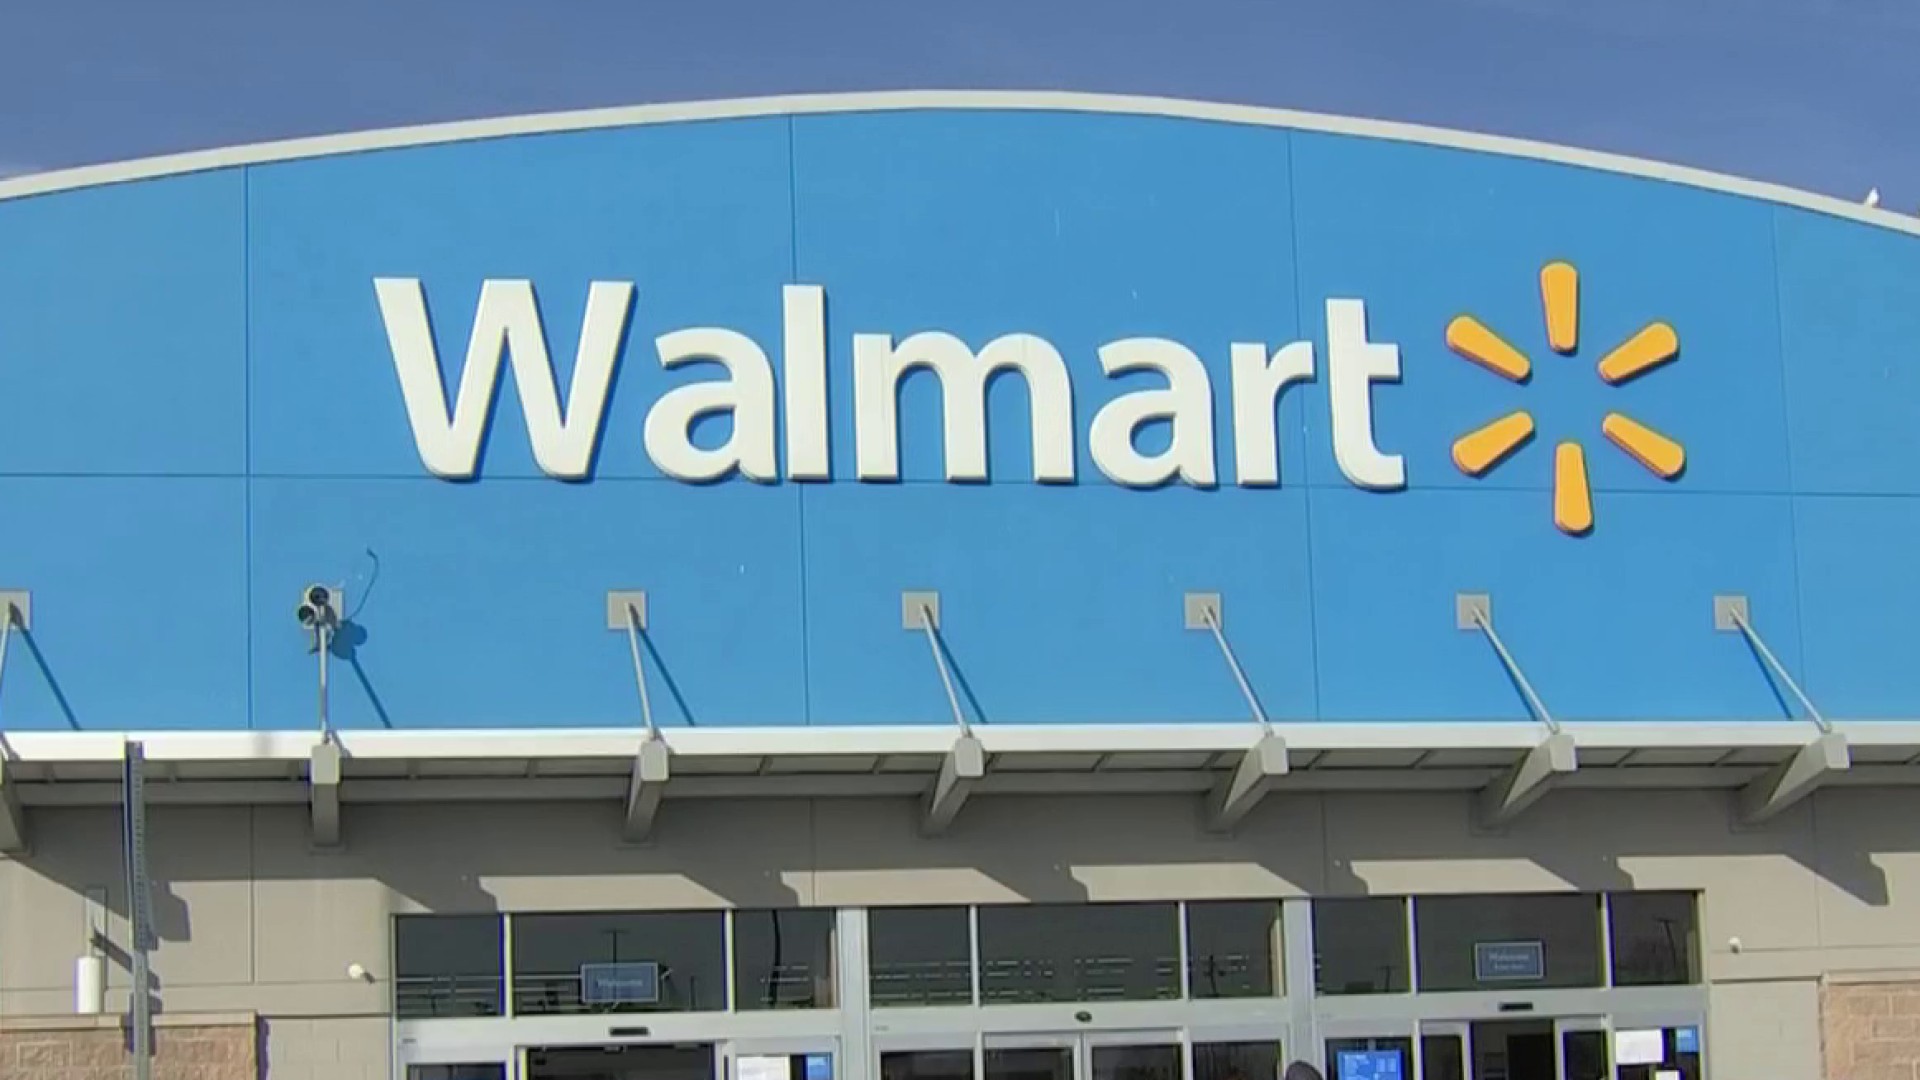 Walmart To Temporarily Close Miami Store For COVID Cleaning 